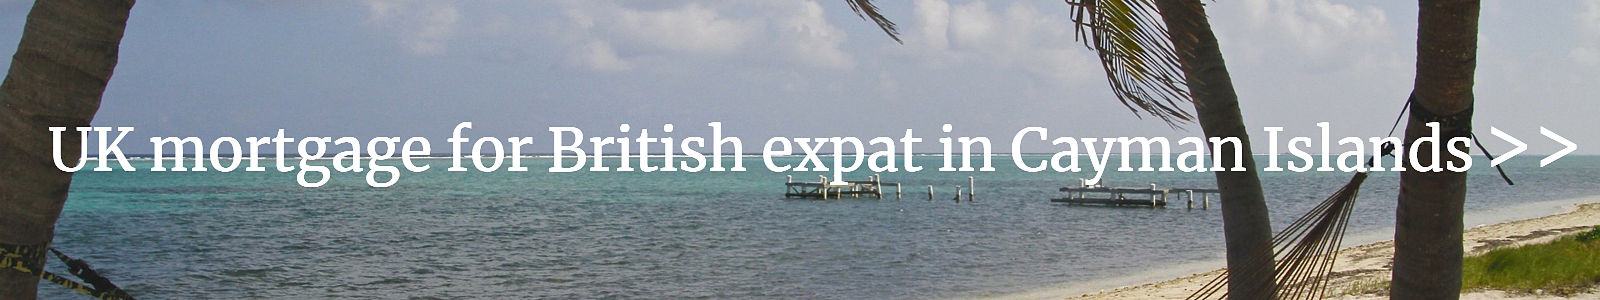 LINK to UK mortgage for British expat in Cayman Islands